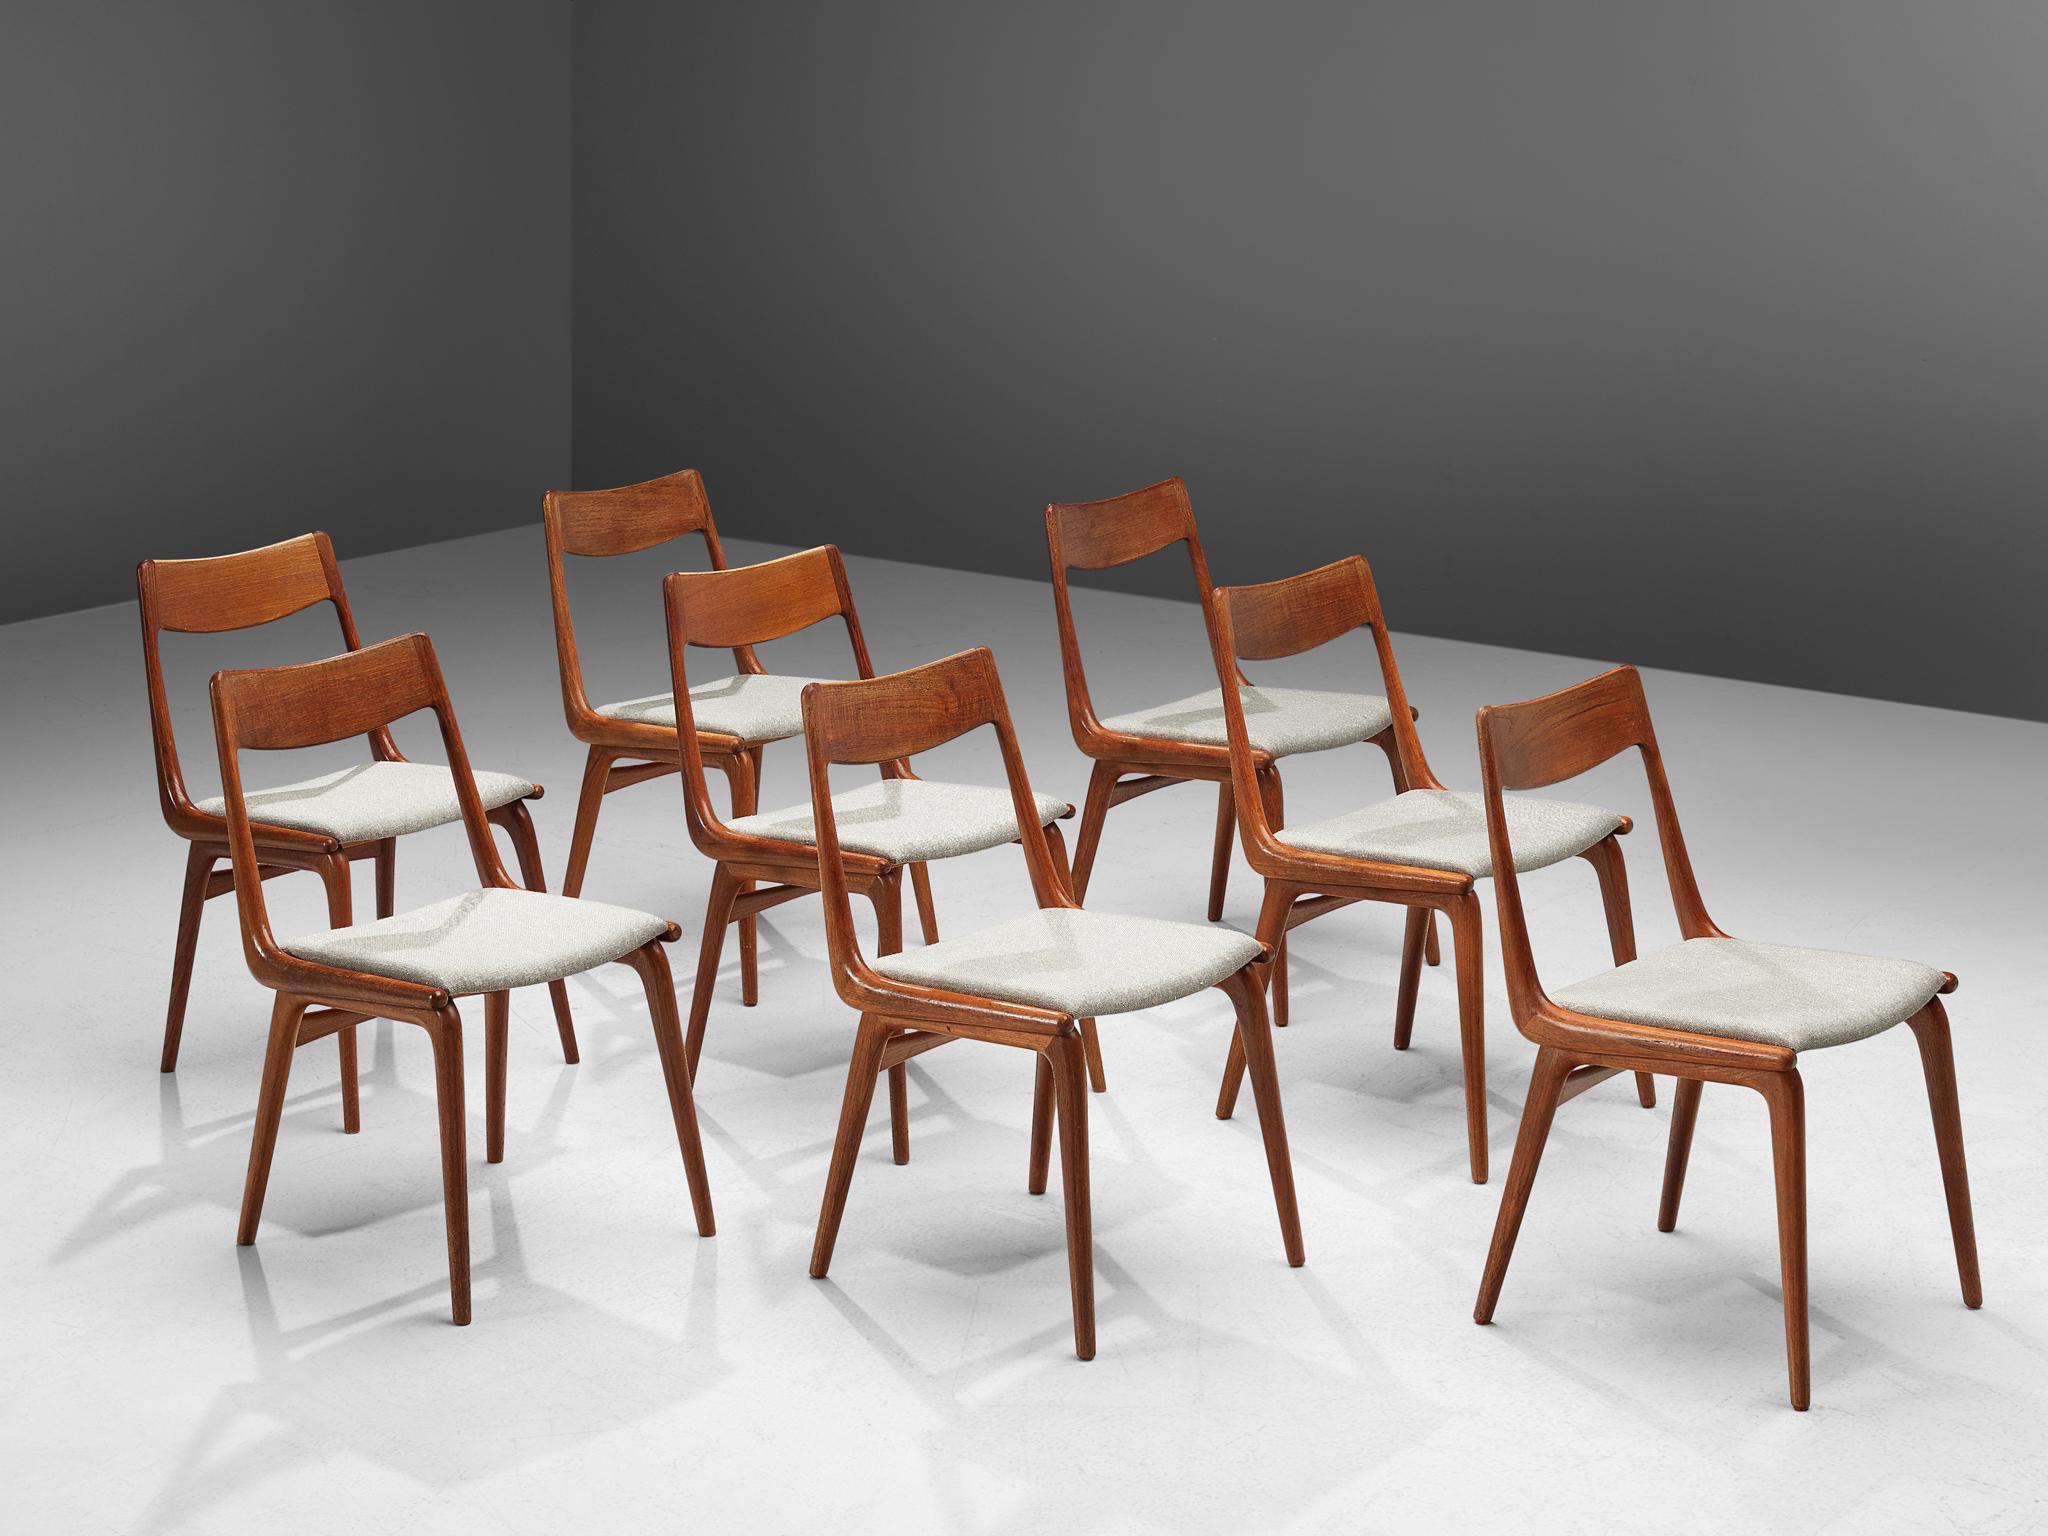 Alfred Christensen for Slagelse Møbelvaerk, dining chairs, teak and light gray upholstery, Denmark, 1960s.

Elegant set of eight Danish dining chairs, featuring a teak frame. Seen from the side, the seat's frame that flows over to the backrest has a